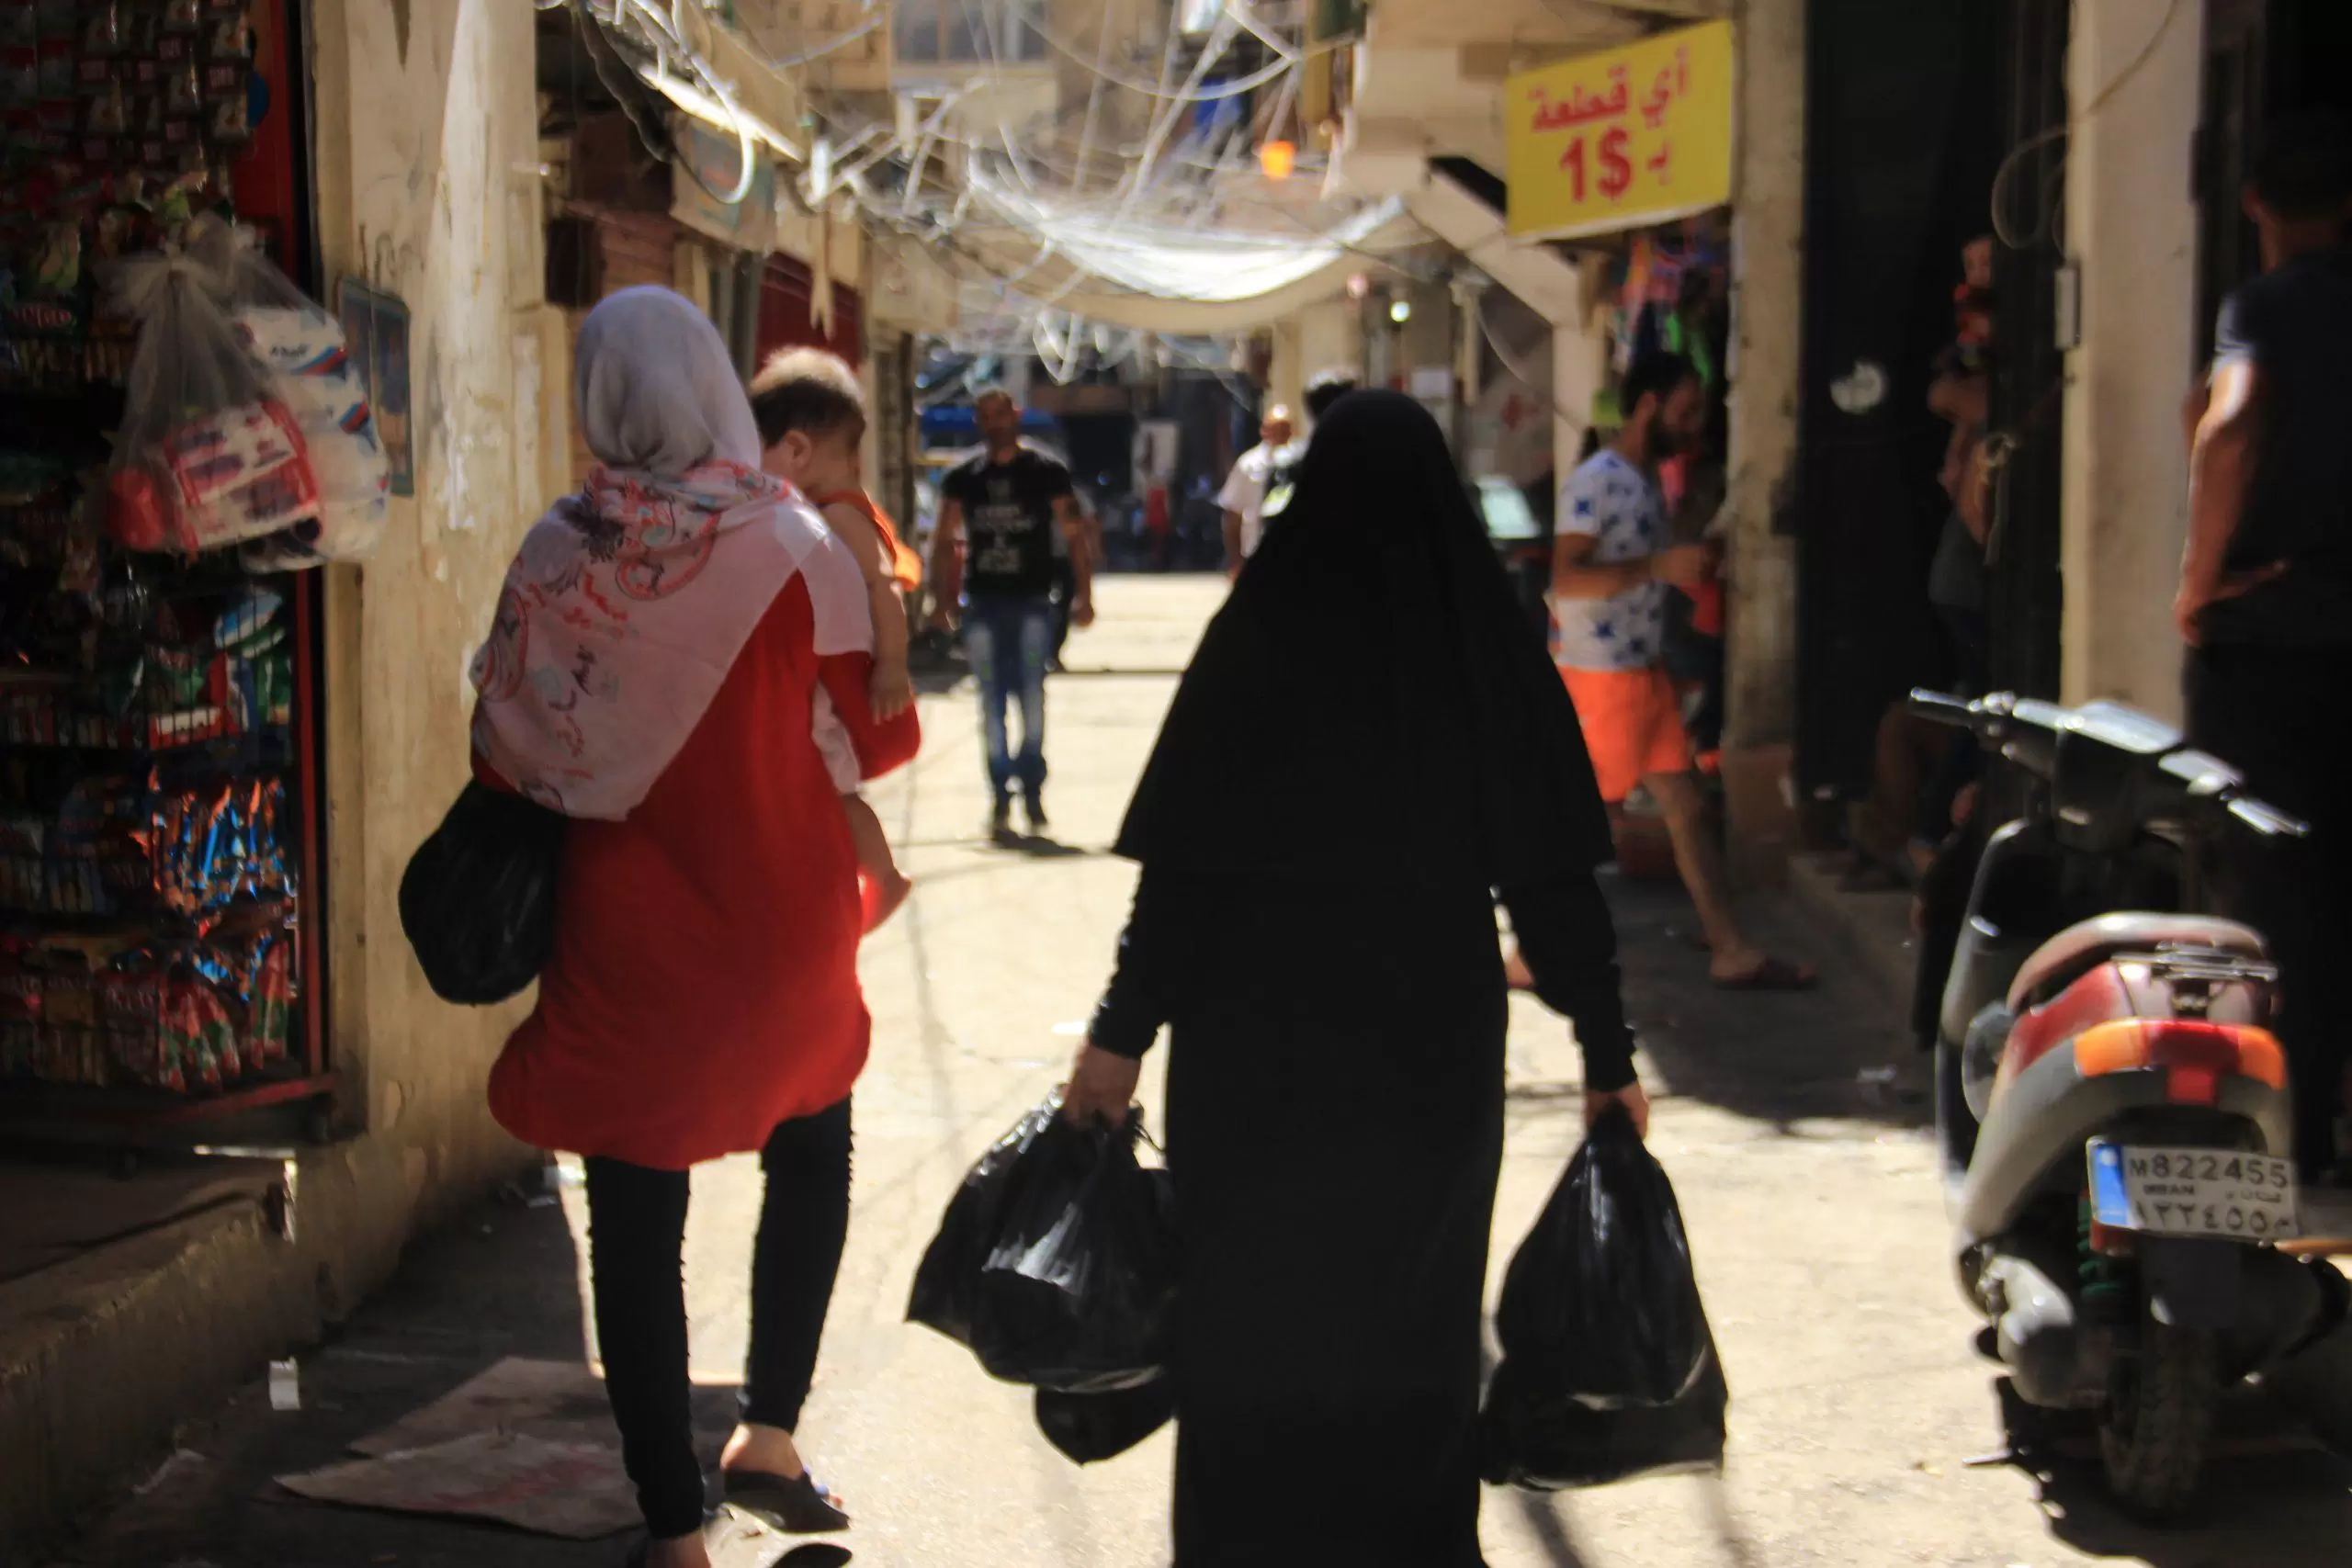 A community of families in the dark – help us get COVID-19 response to Shatila